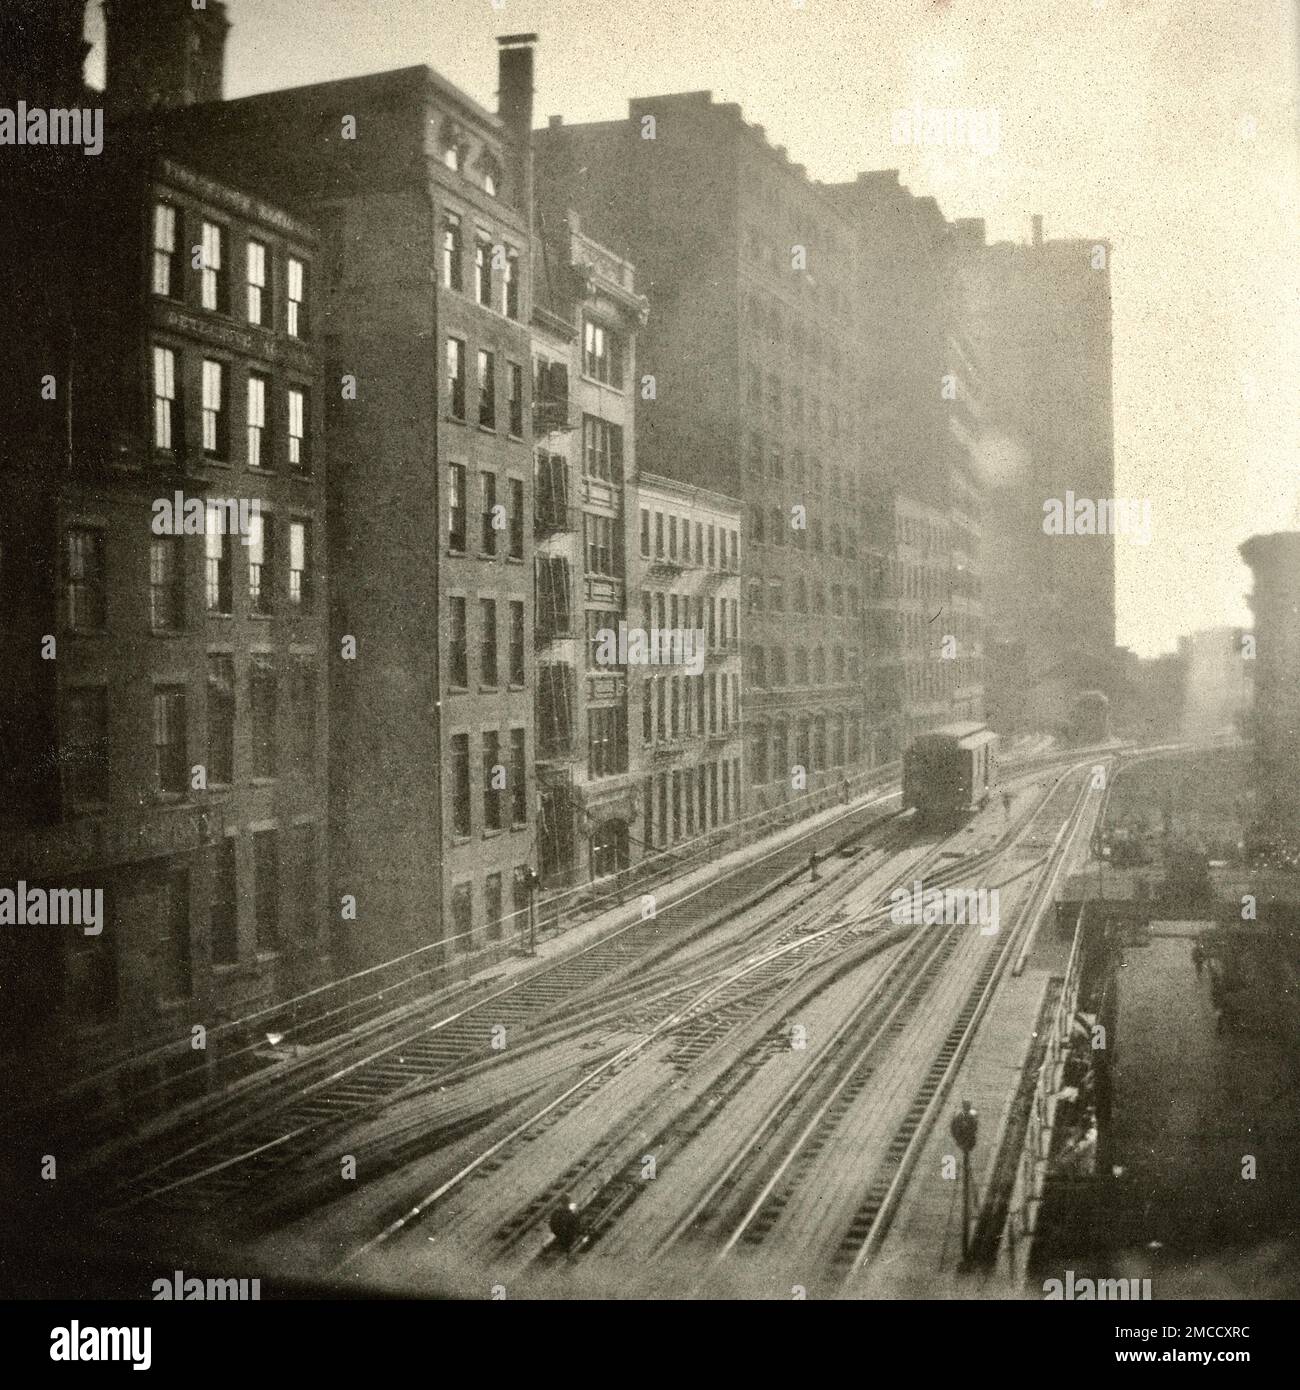 1900s NYC, Elevated Train, New York City History, about 1900s, Manhattan, Vintage El Train, Turn of the Century NYC Stock Photo